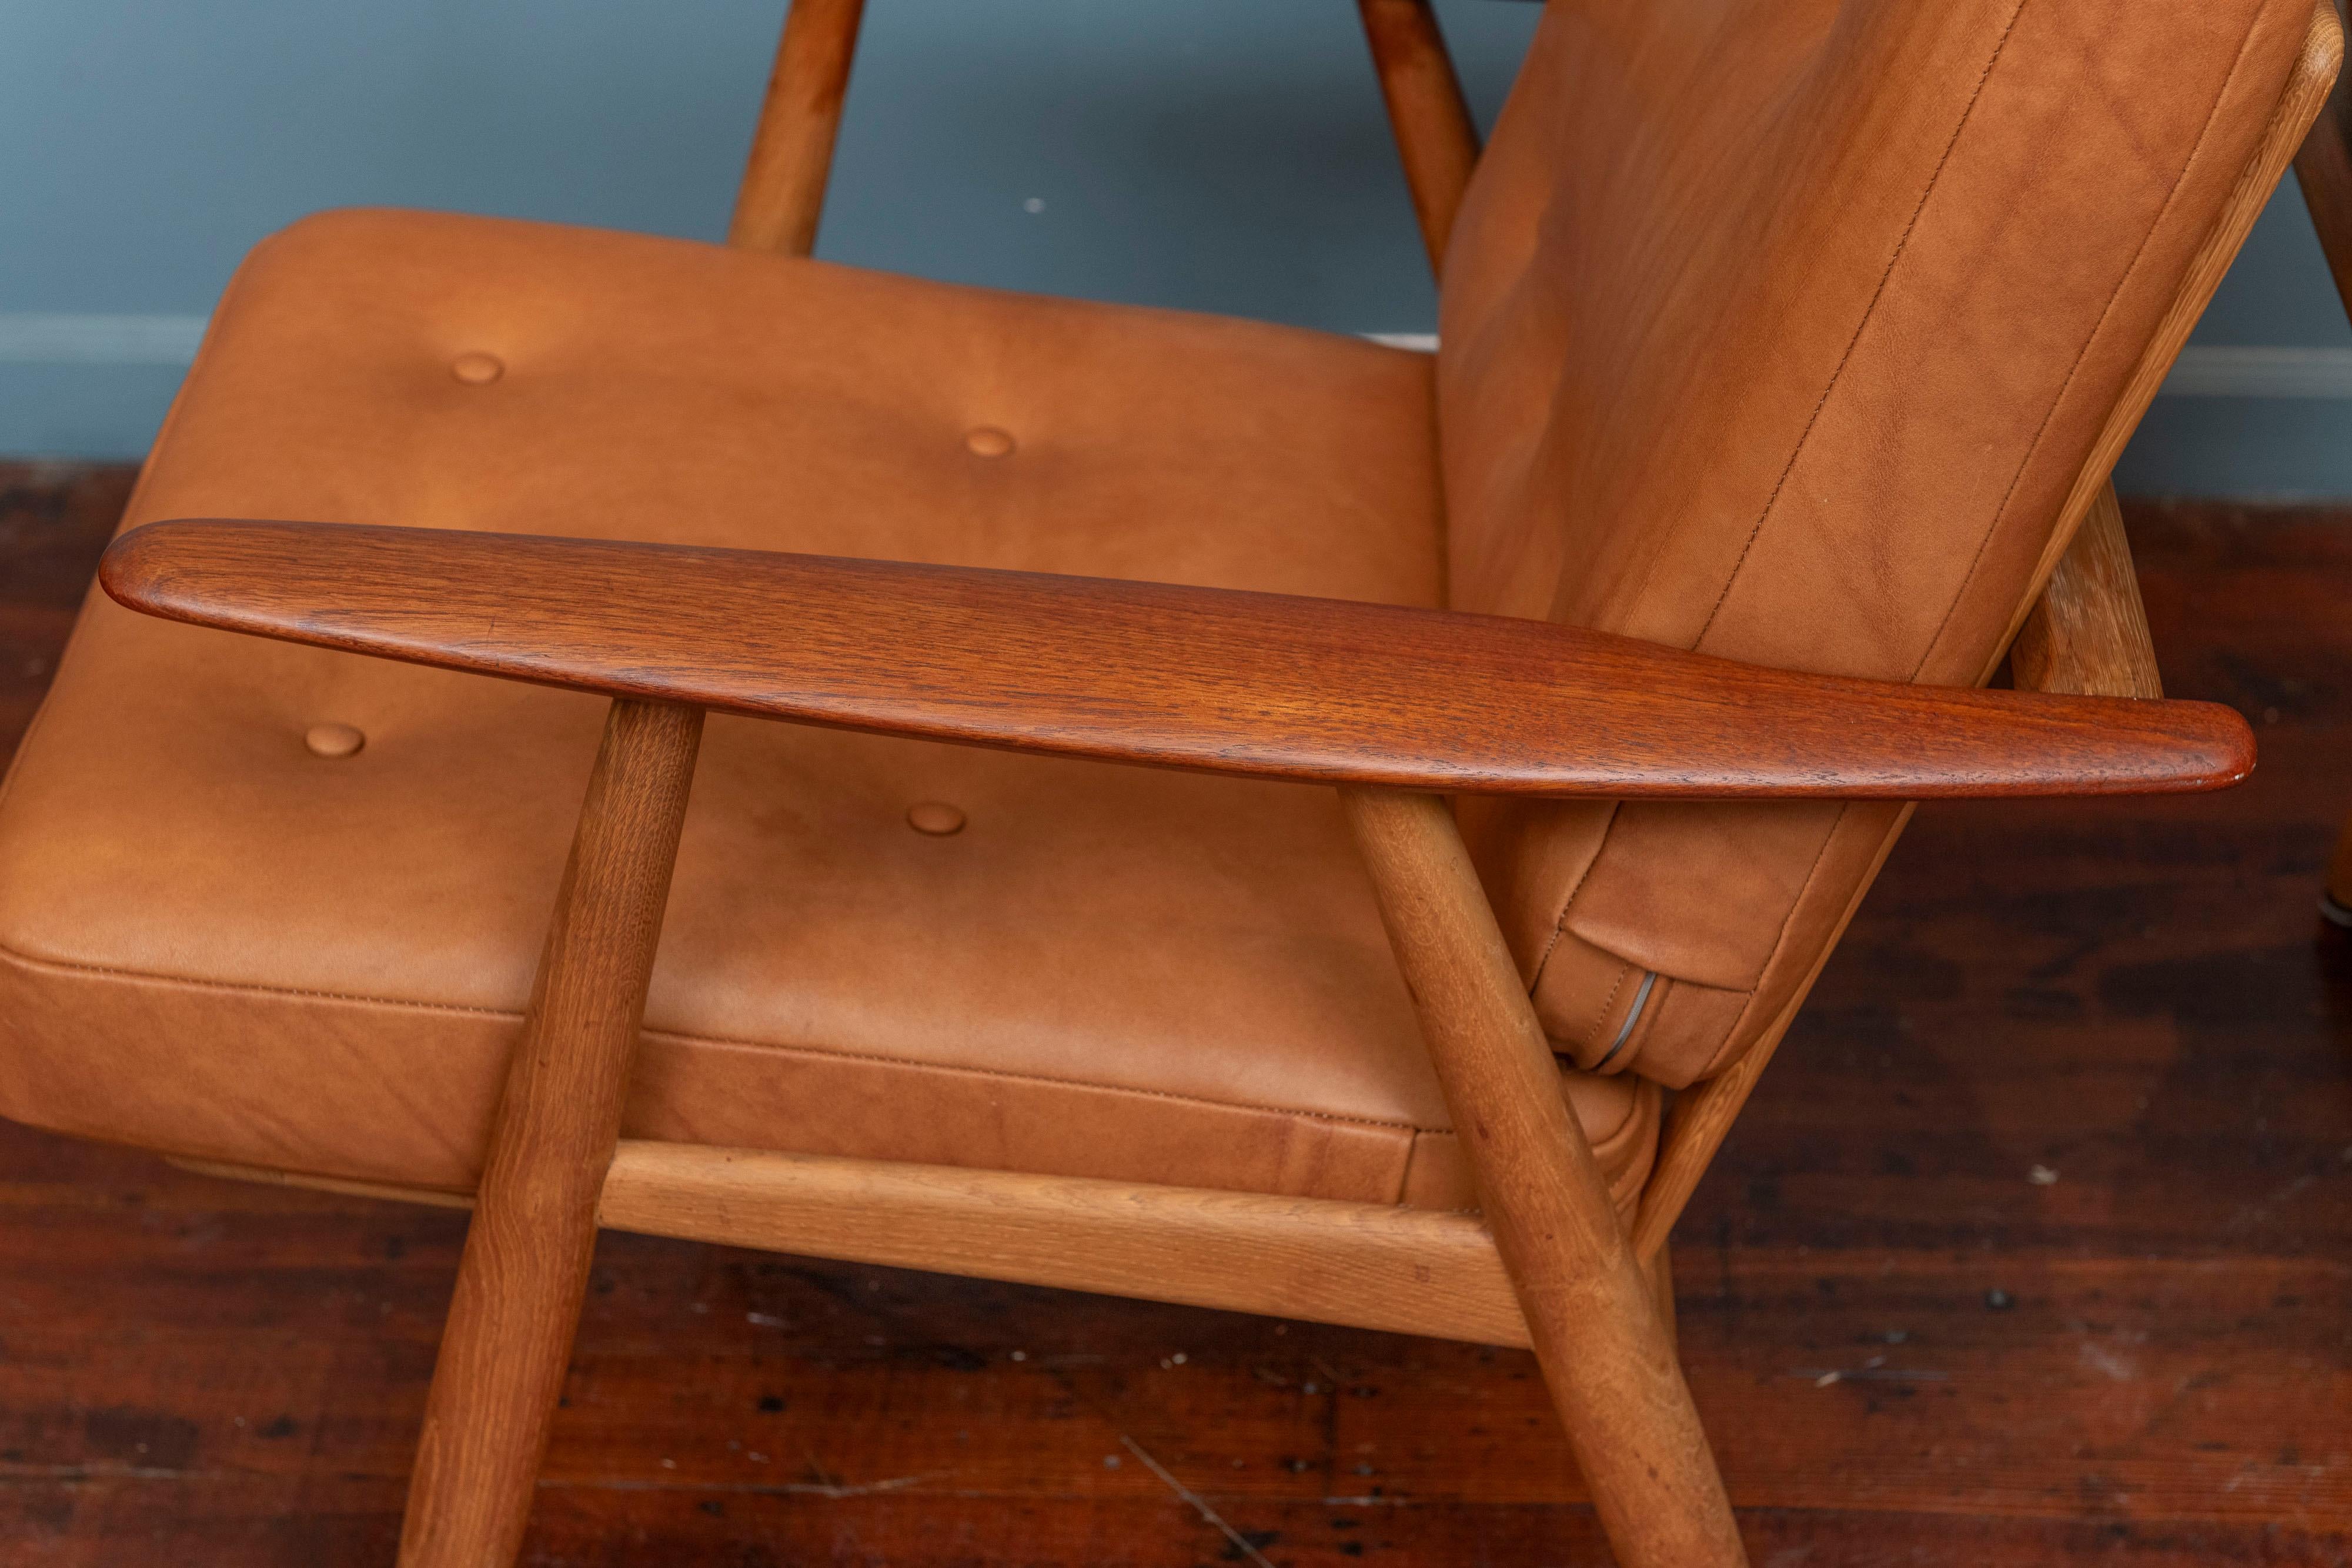 cigar chairs for sale